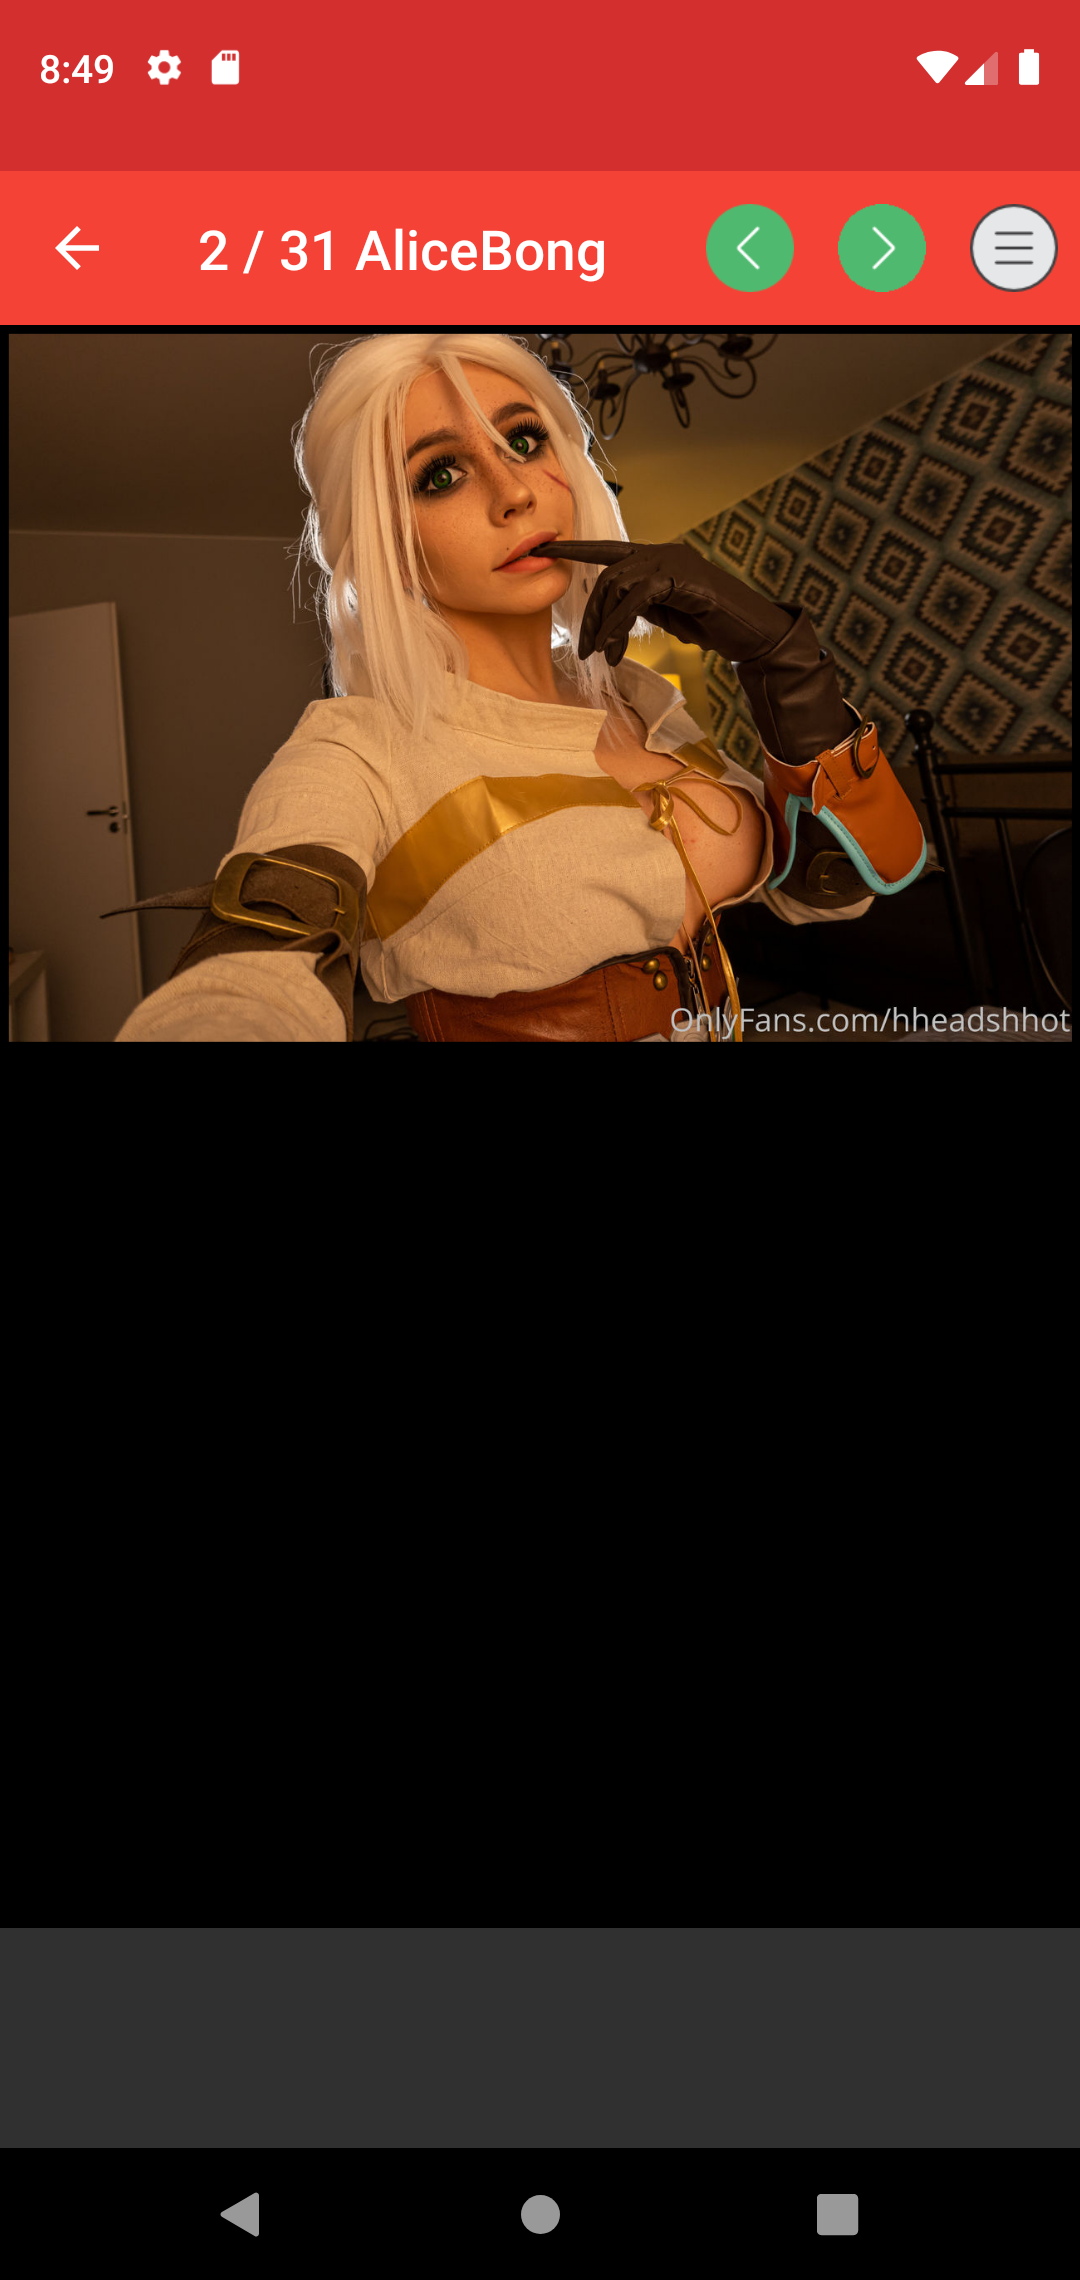 Witcher Cosplays hentia,porn,kristinf,download,comics,witcher,erotic,manga,hentai,where,android,sexy,cosplay,galleries,aletta,live,app,pornstar,wallpaper,hot,ocean,anime,apk,pics,adult,apps